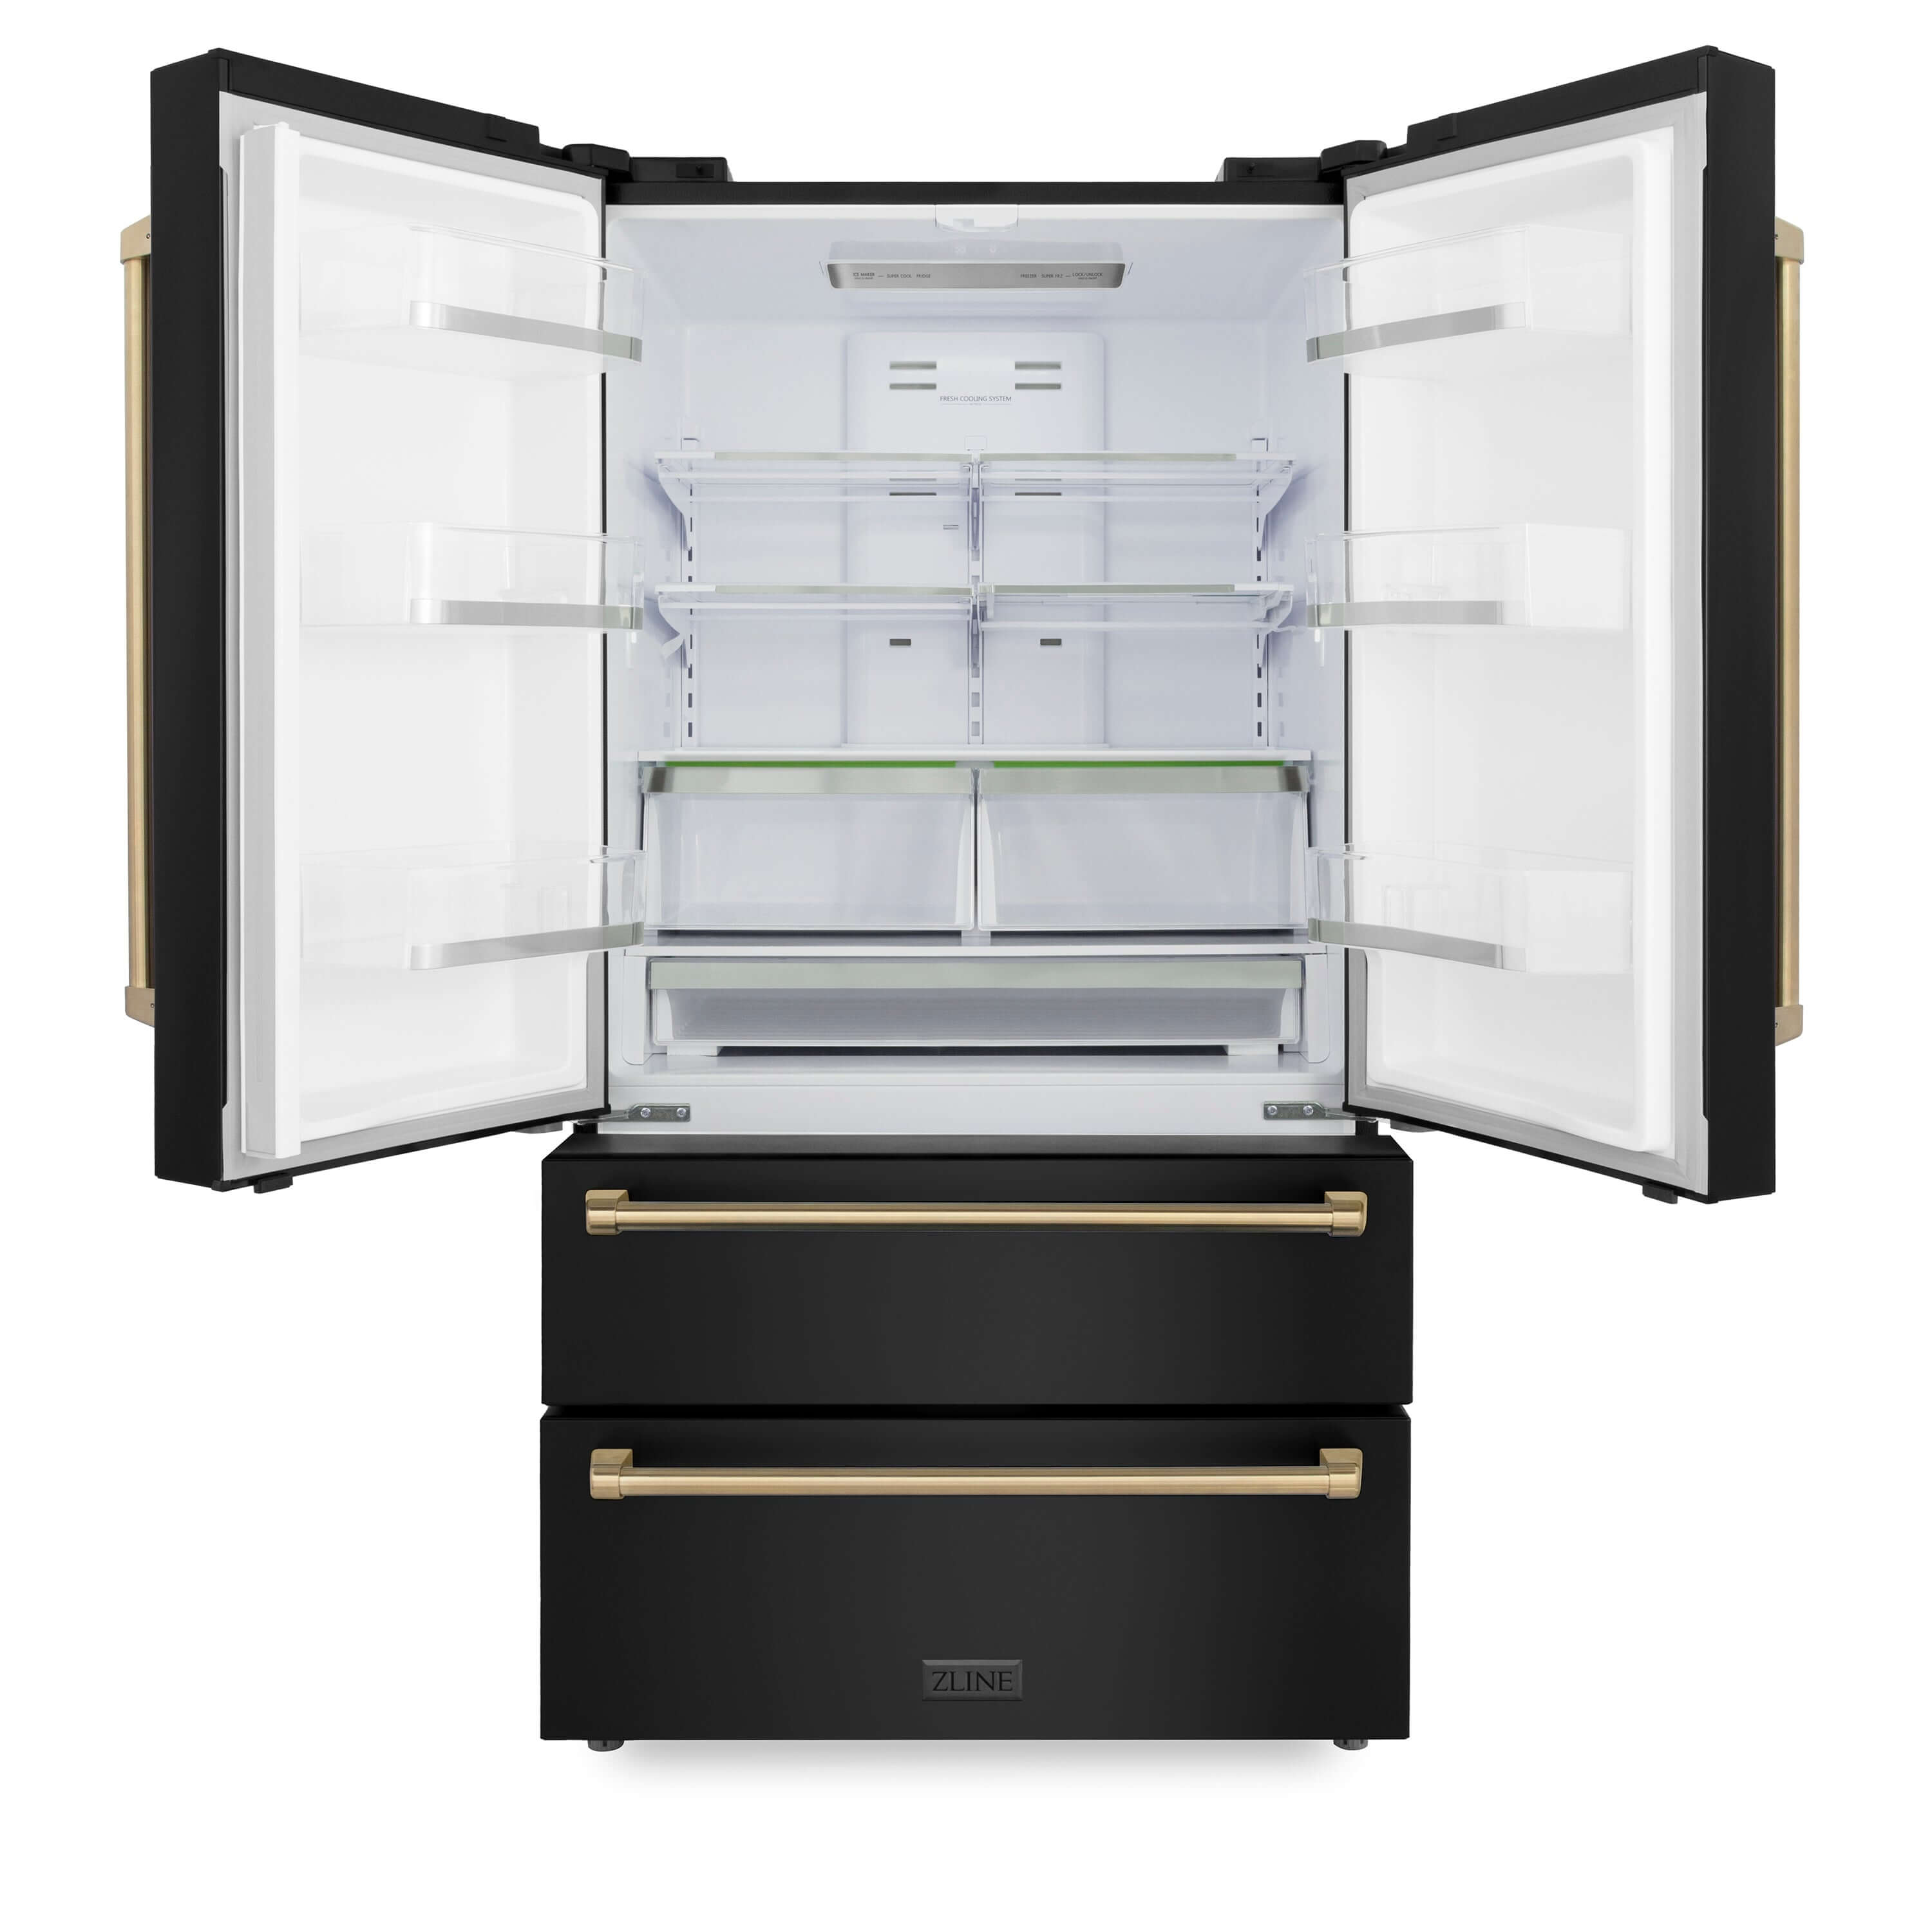 ZLINE 36 in. Autograph Edition French Door Refrigerator with Ice Maker in Black Stainless Steel with Champagne Bronze Accents front with doors open.